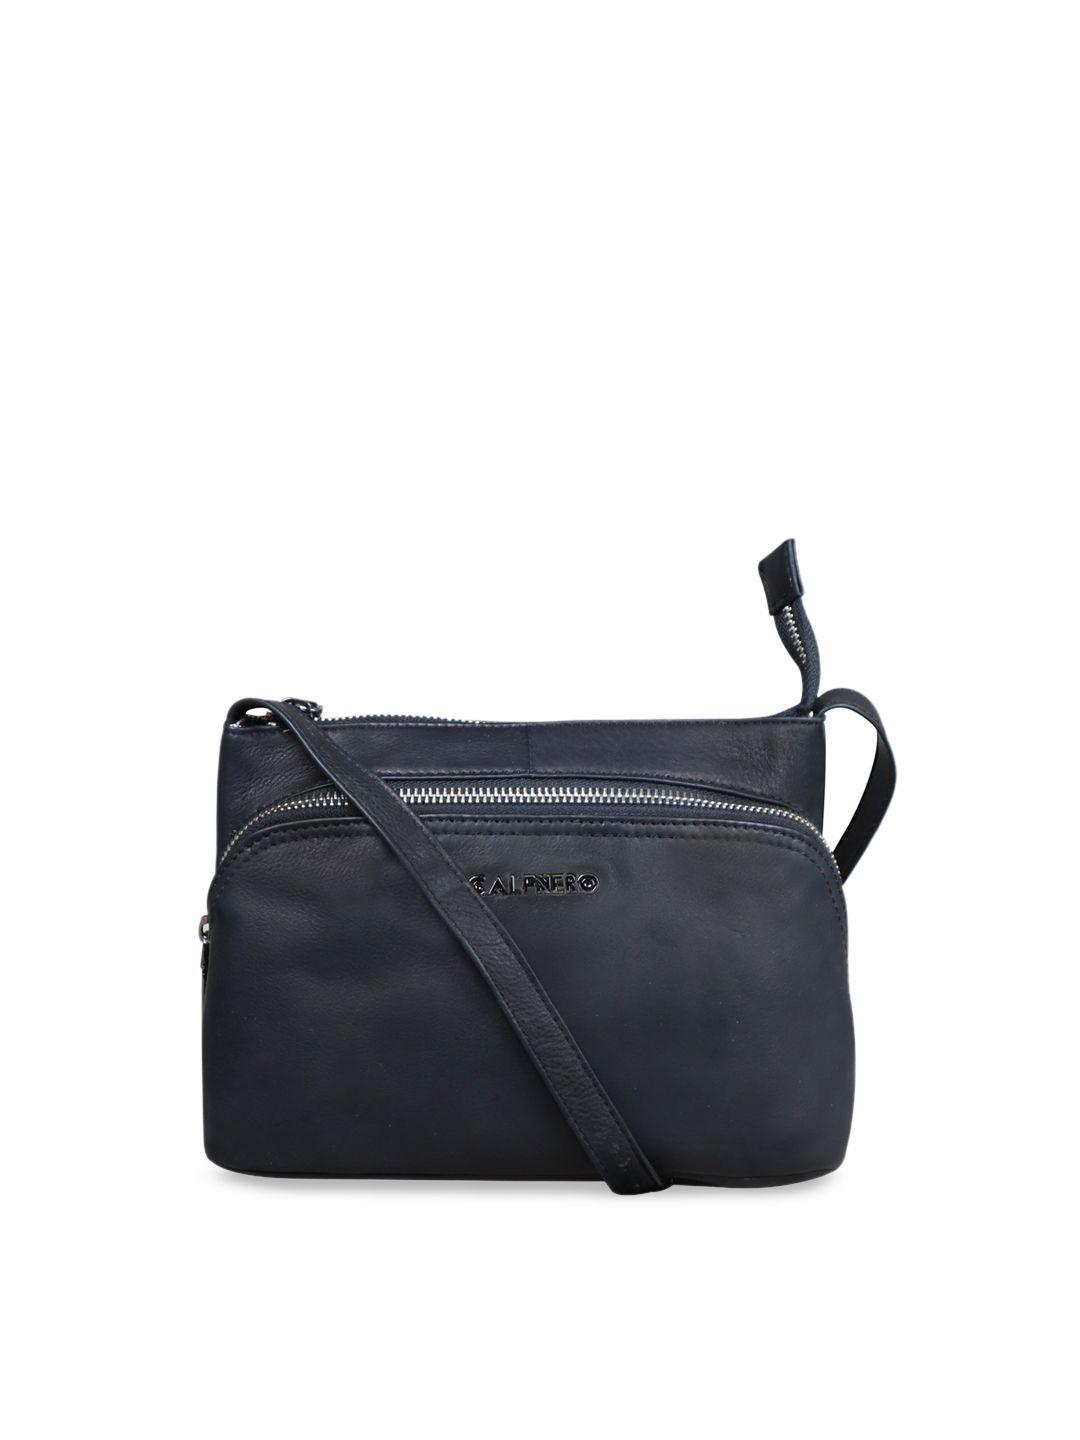 calfnero black leather structured sling bag with tasselled